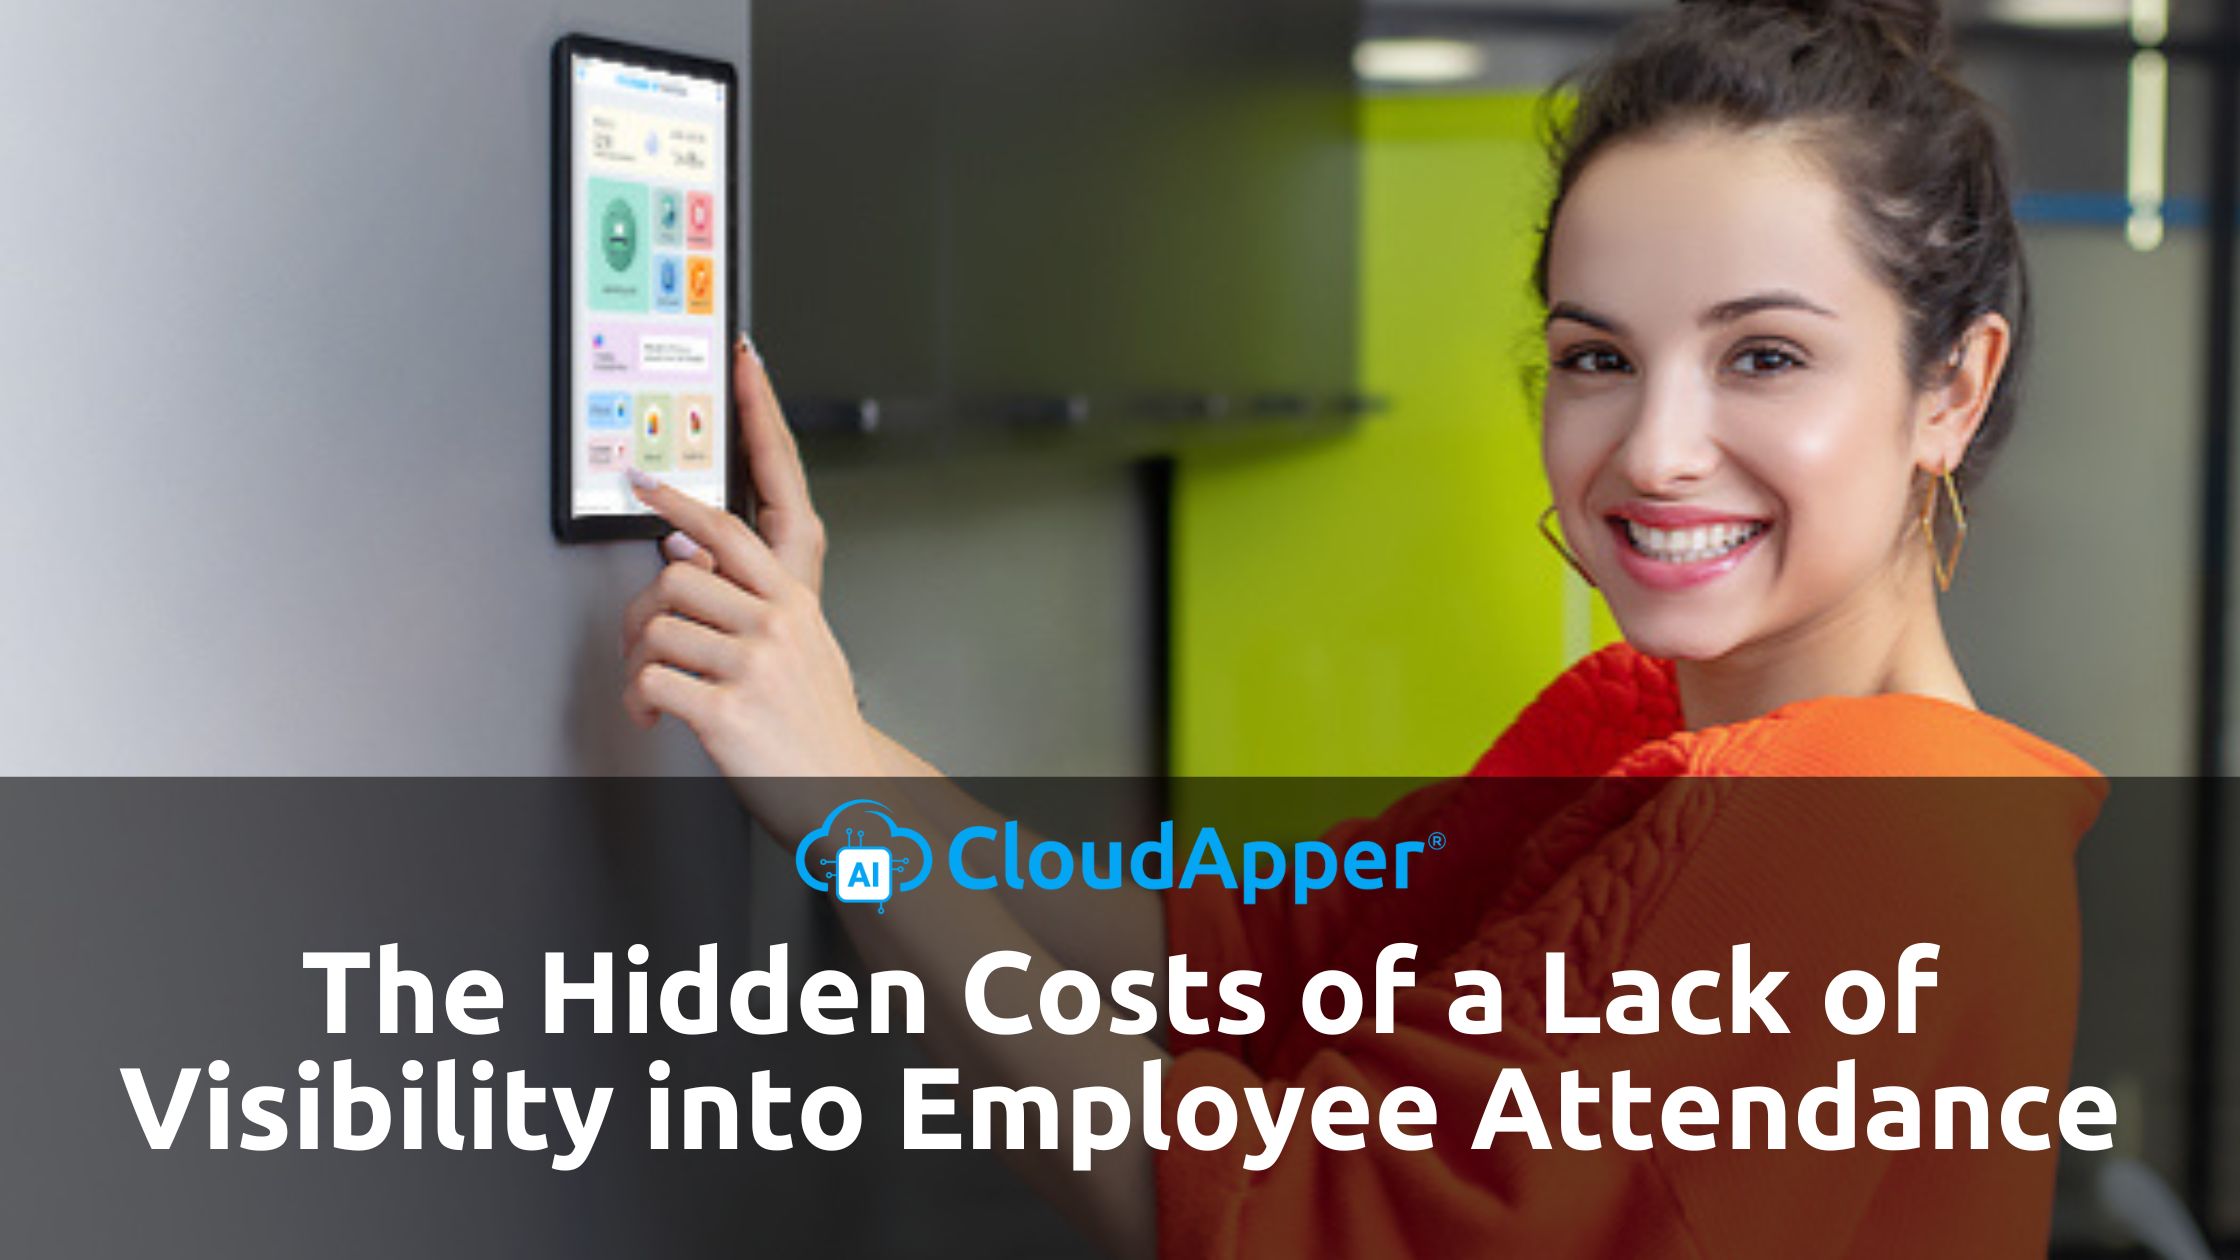 The Hidden Costs of a Lack of Visibility into Employee Attendance